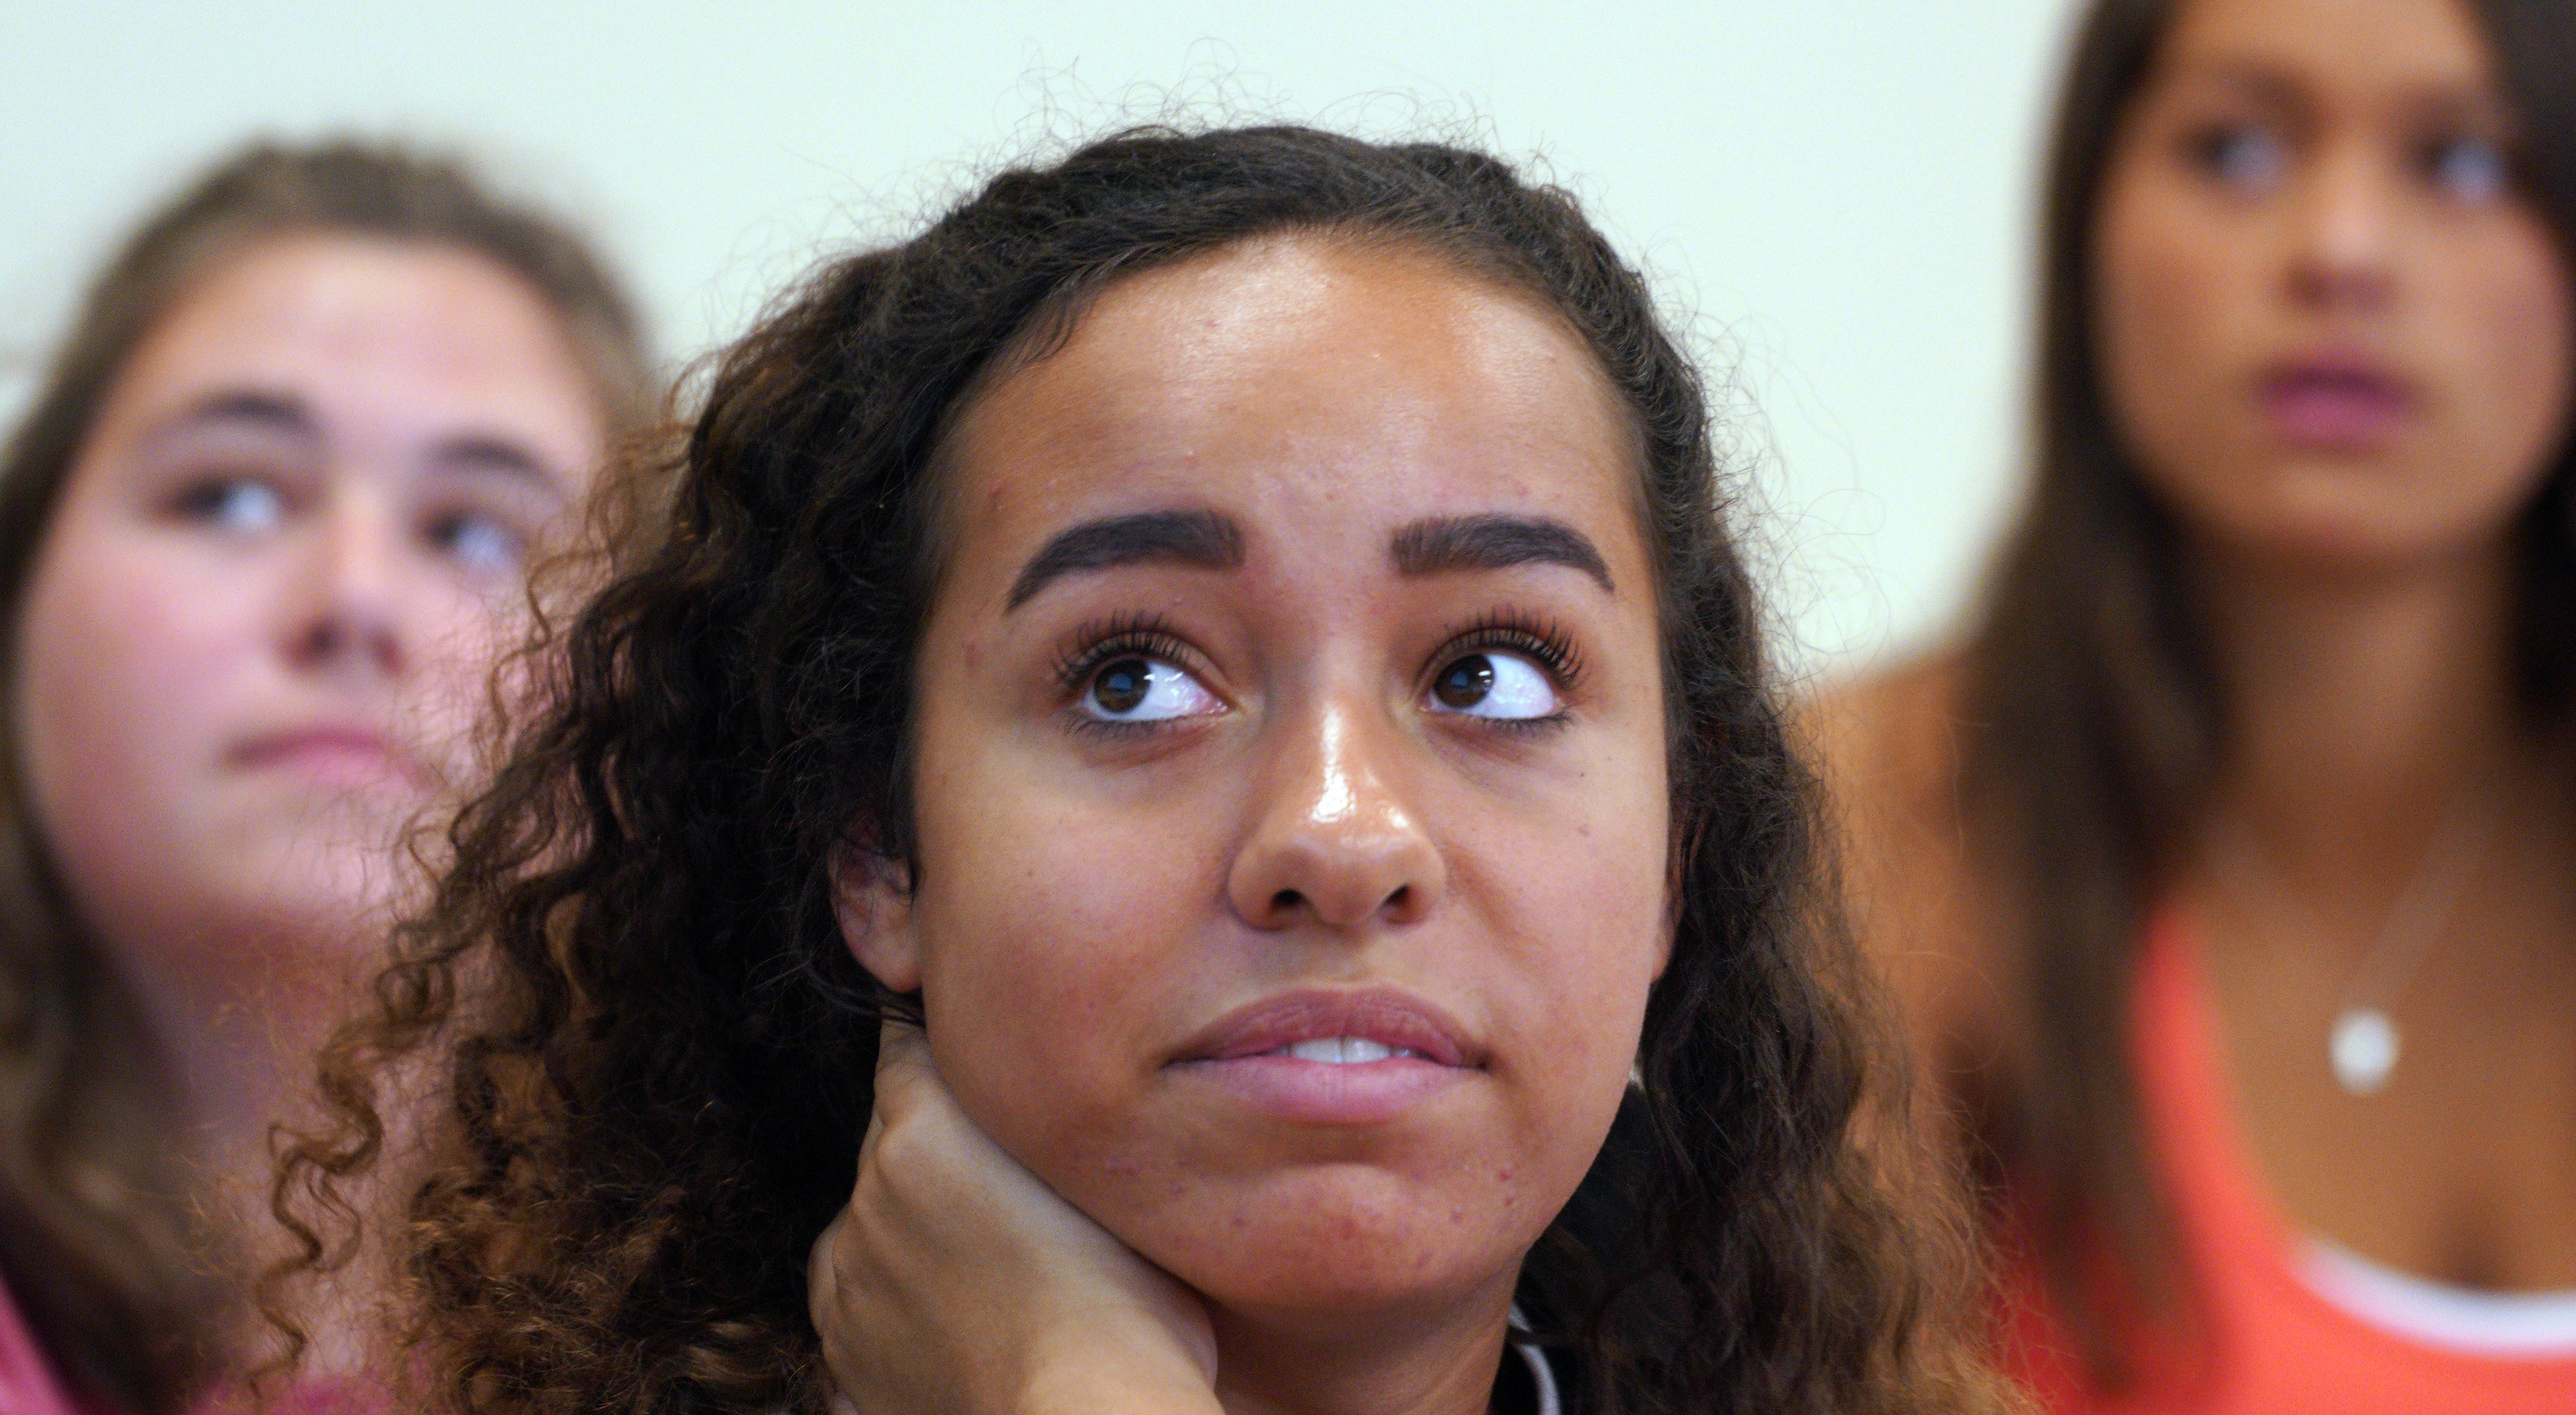 Student looks at whiteboard while Emily Akil asks questions